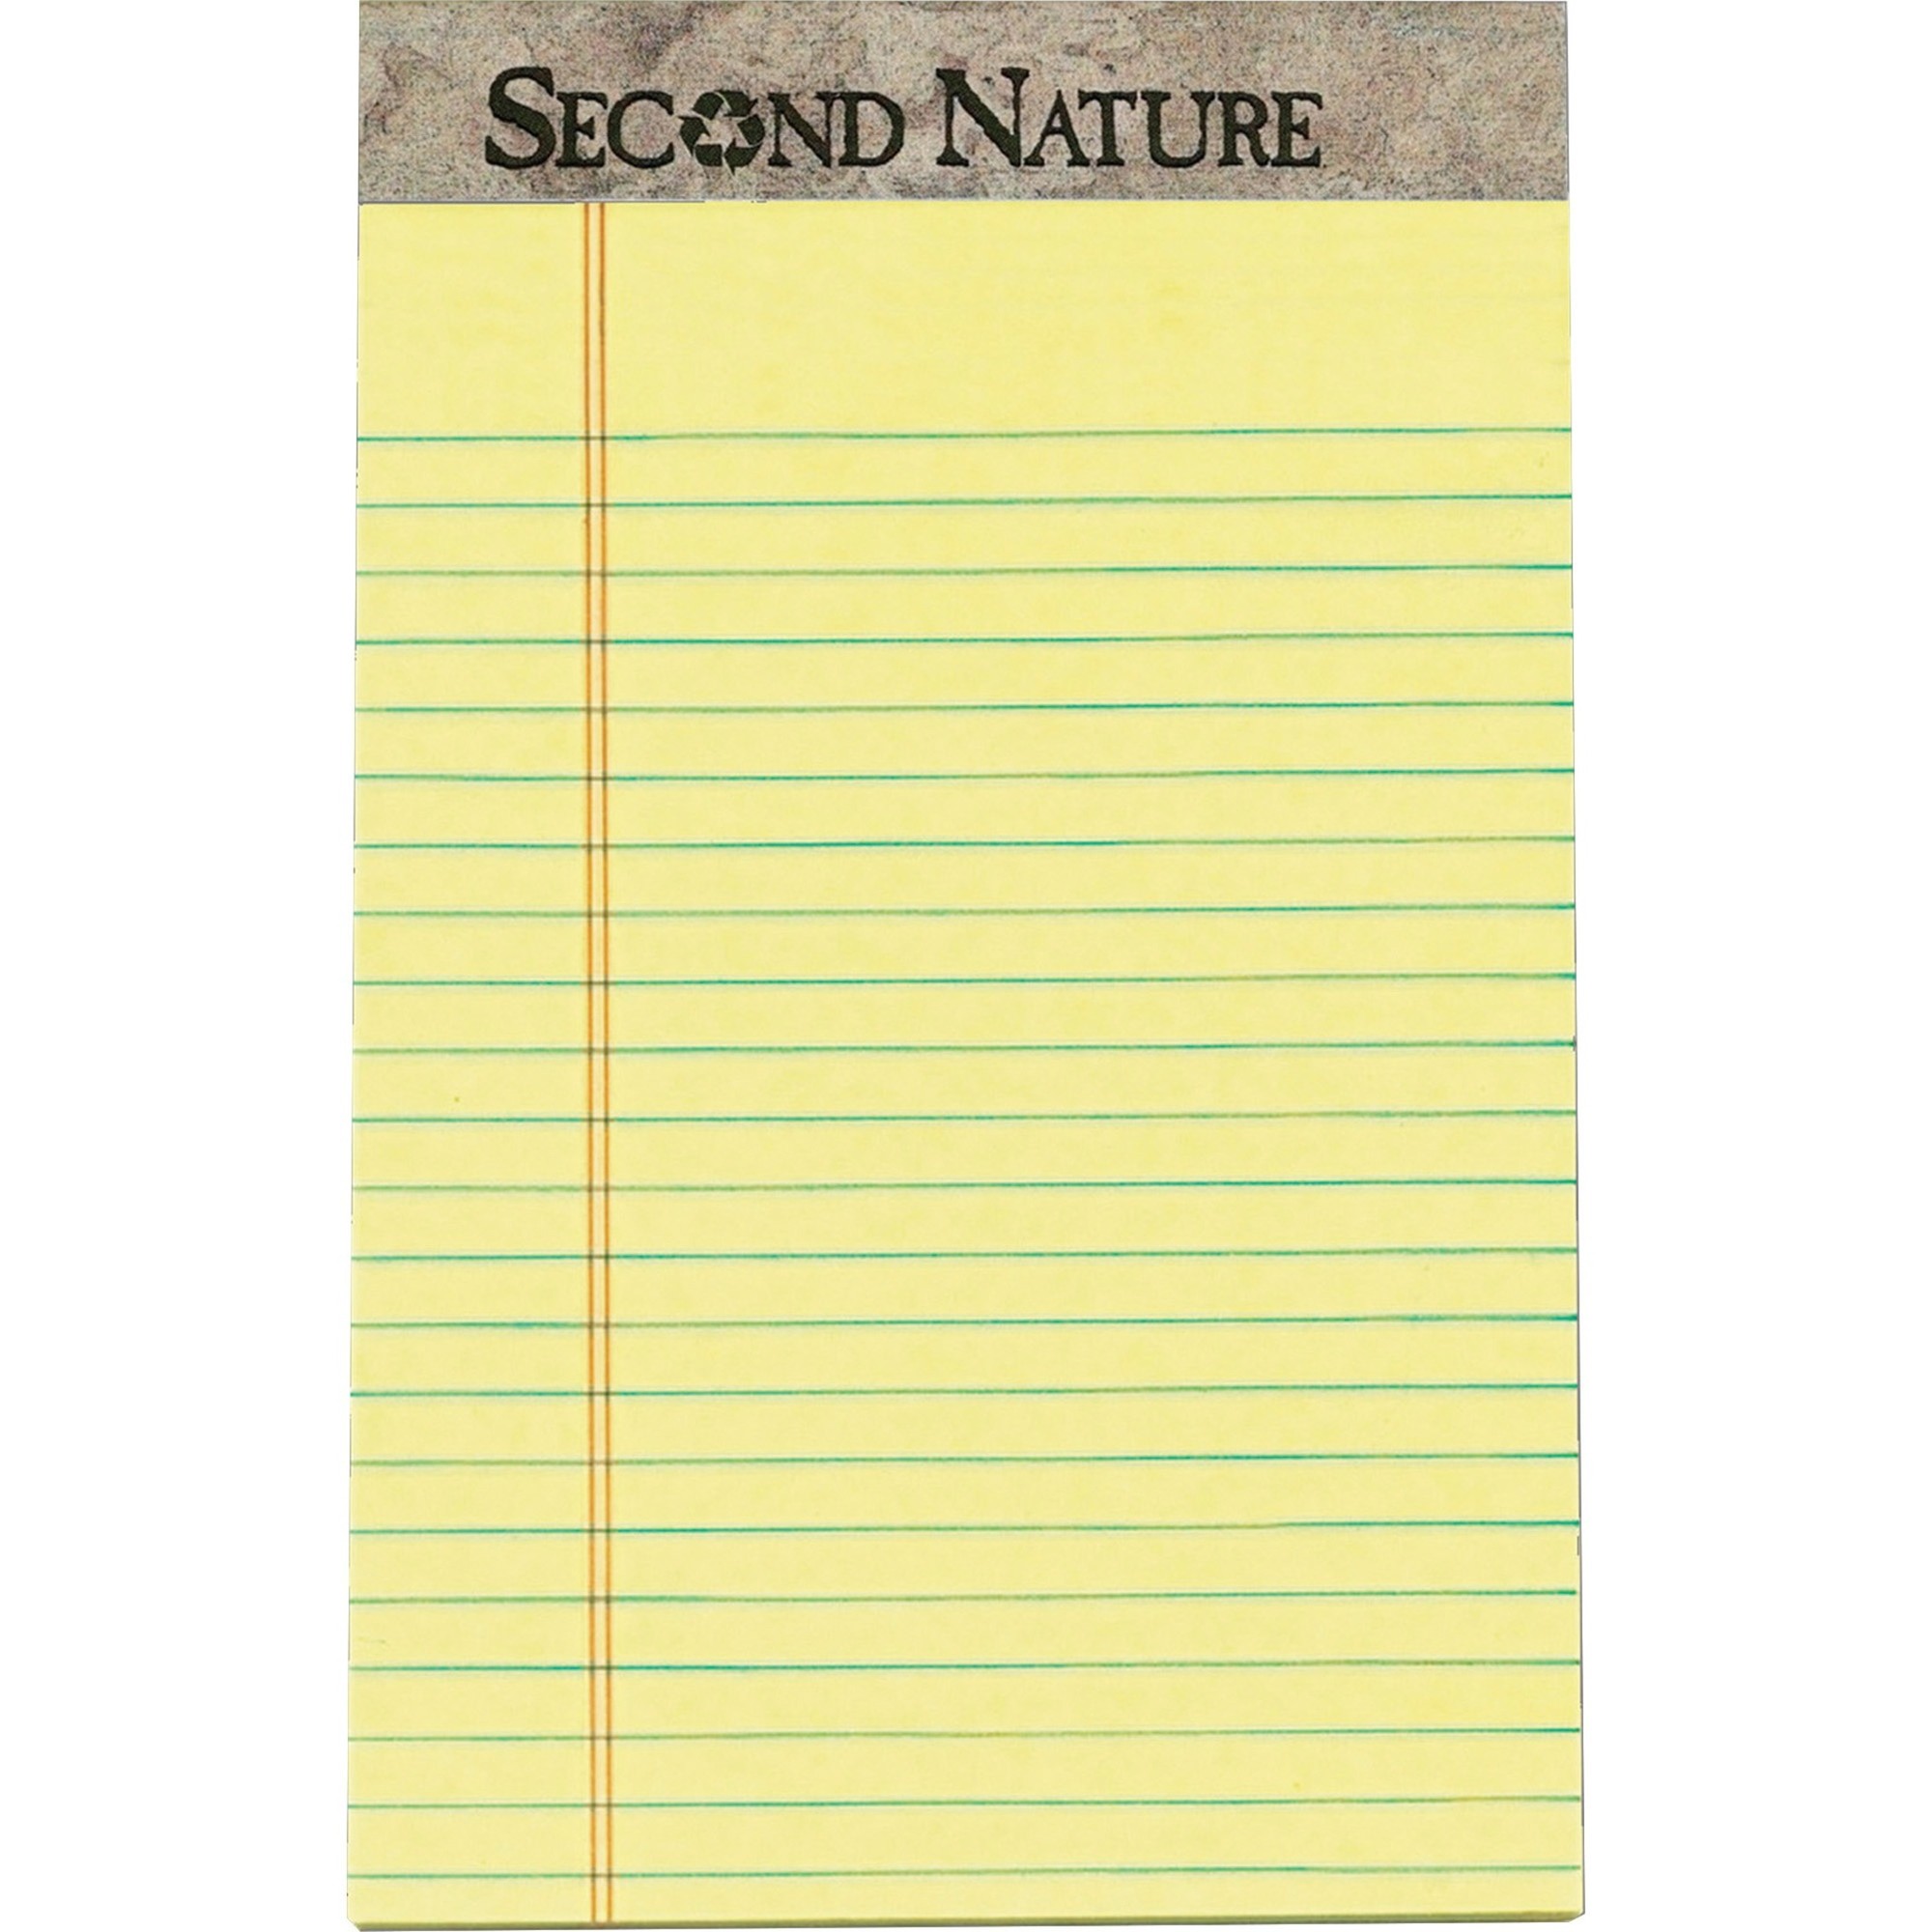 TOPS Second Nature Recycled Jr Legal Writing Pad - 50 Sheets - 0.28" Ruled - 15 lb Basis Weight - Jr.Legal - 5" x 8" - Canary Pa